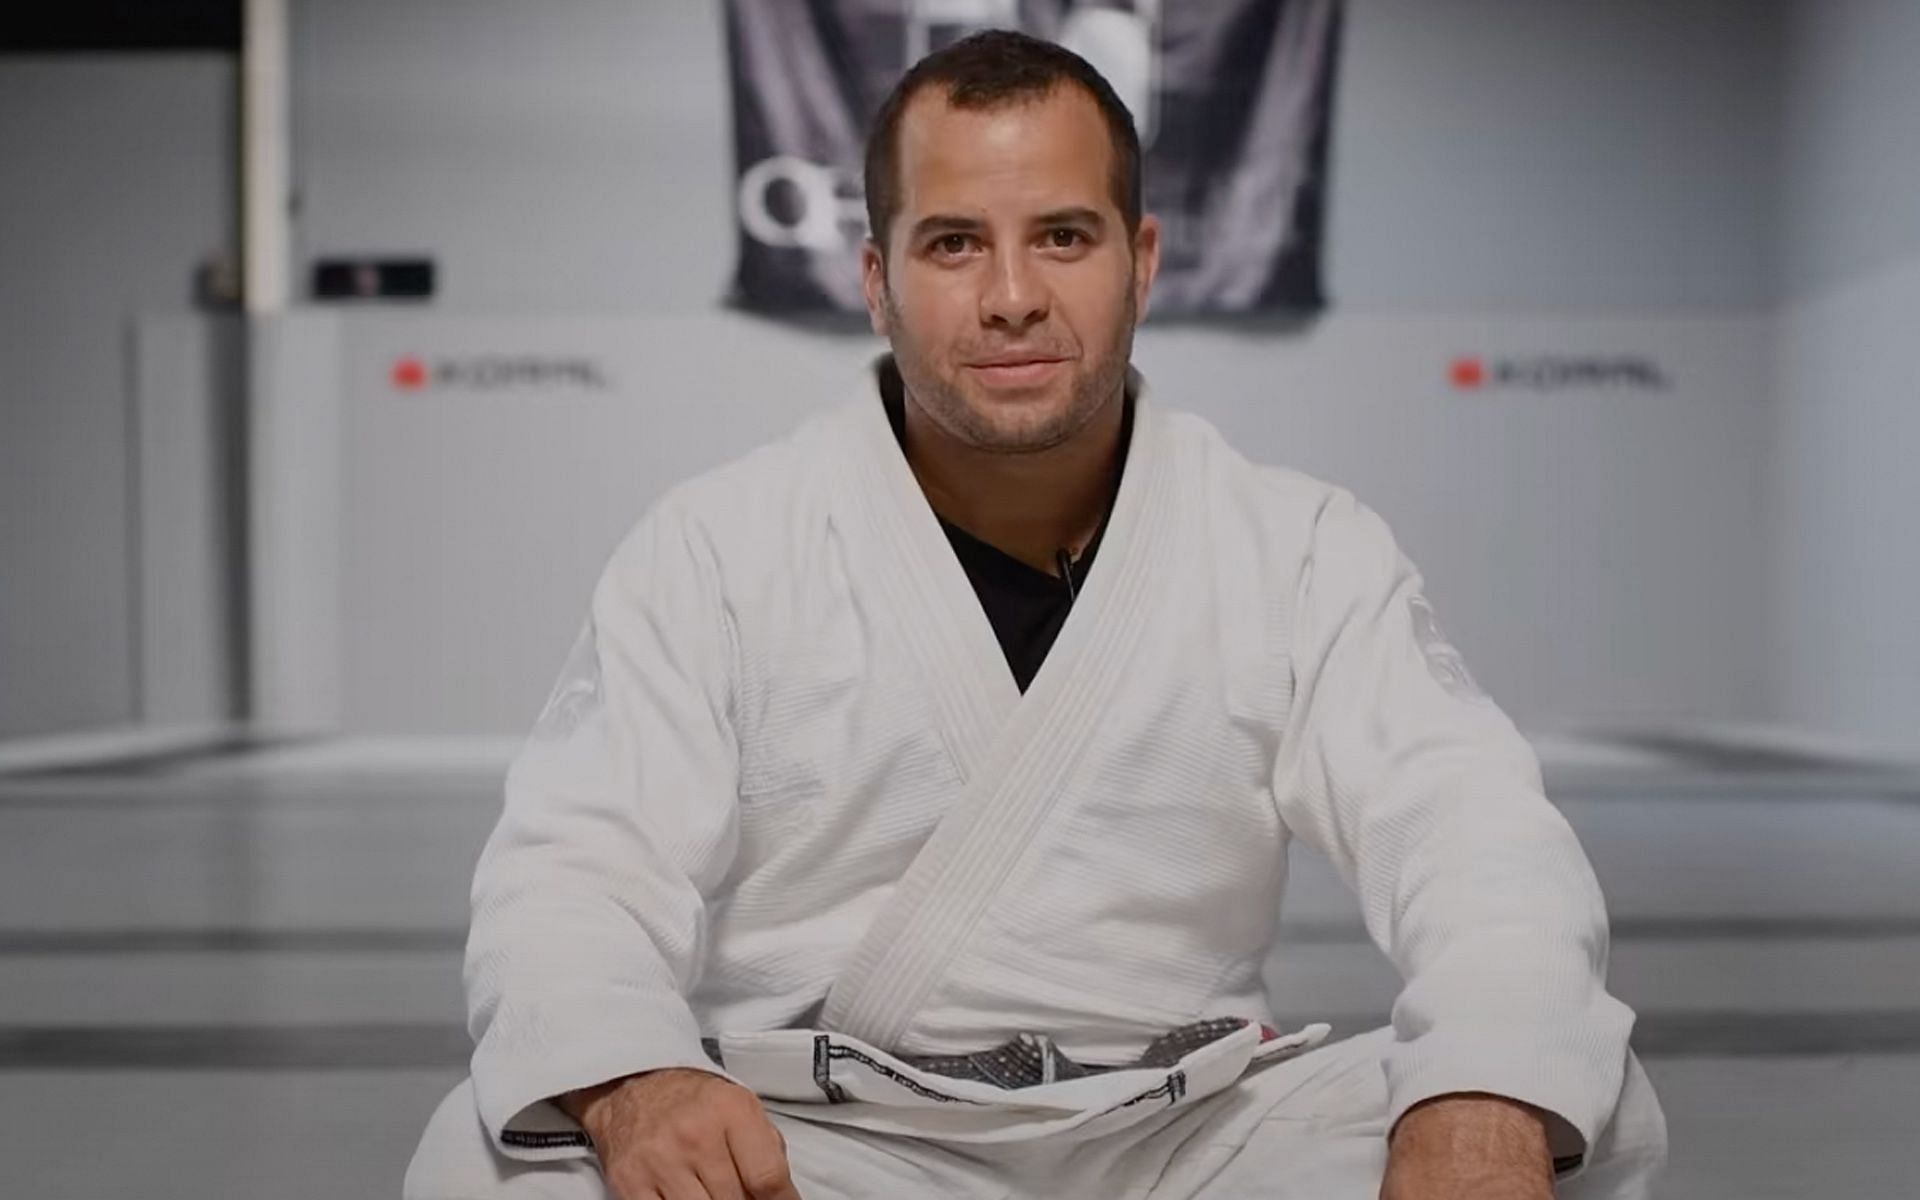 BJJ legend Leo Vieira joins ONE Championship as Vice President for Grappling. | [Photo: ONE Championship]